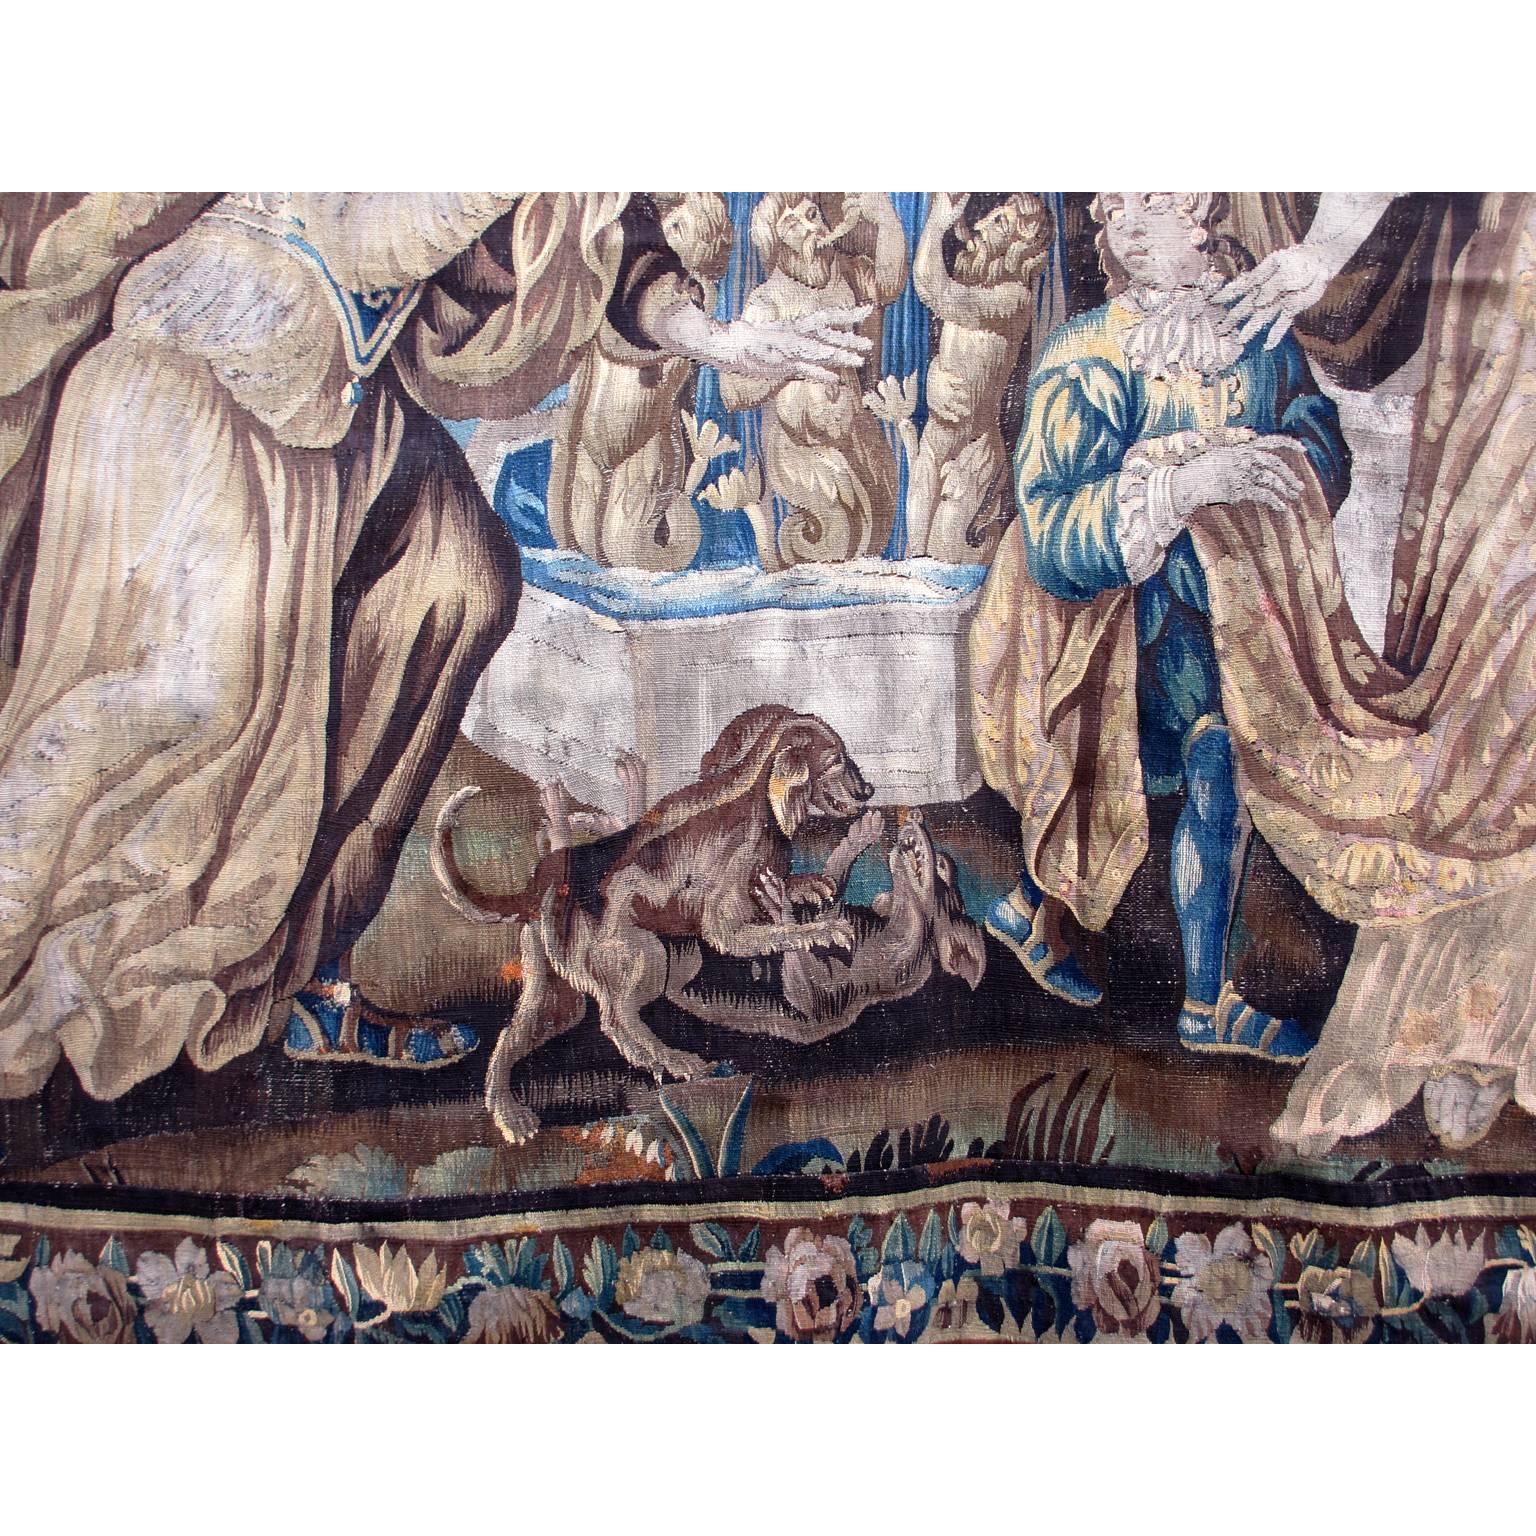 Hand-Woven Large Flemish 17th-18th Century Baroque Figural Tapestry 